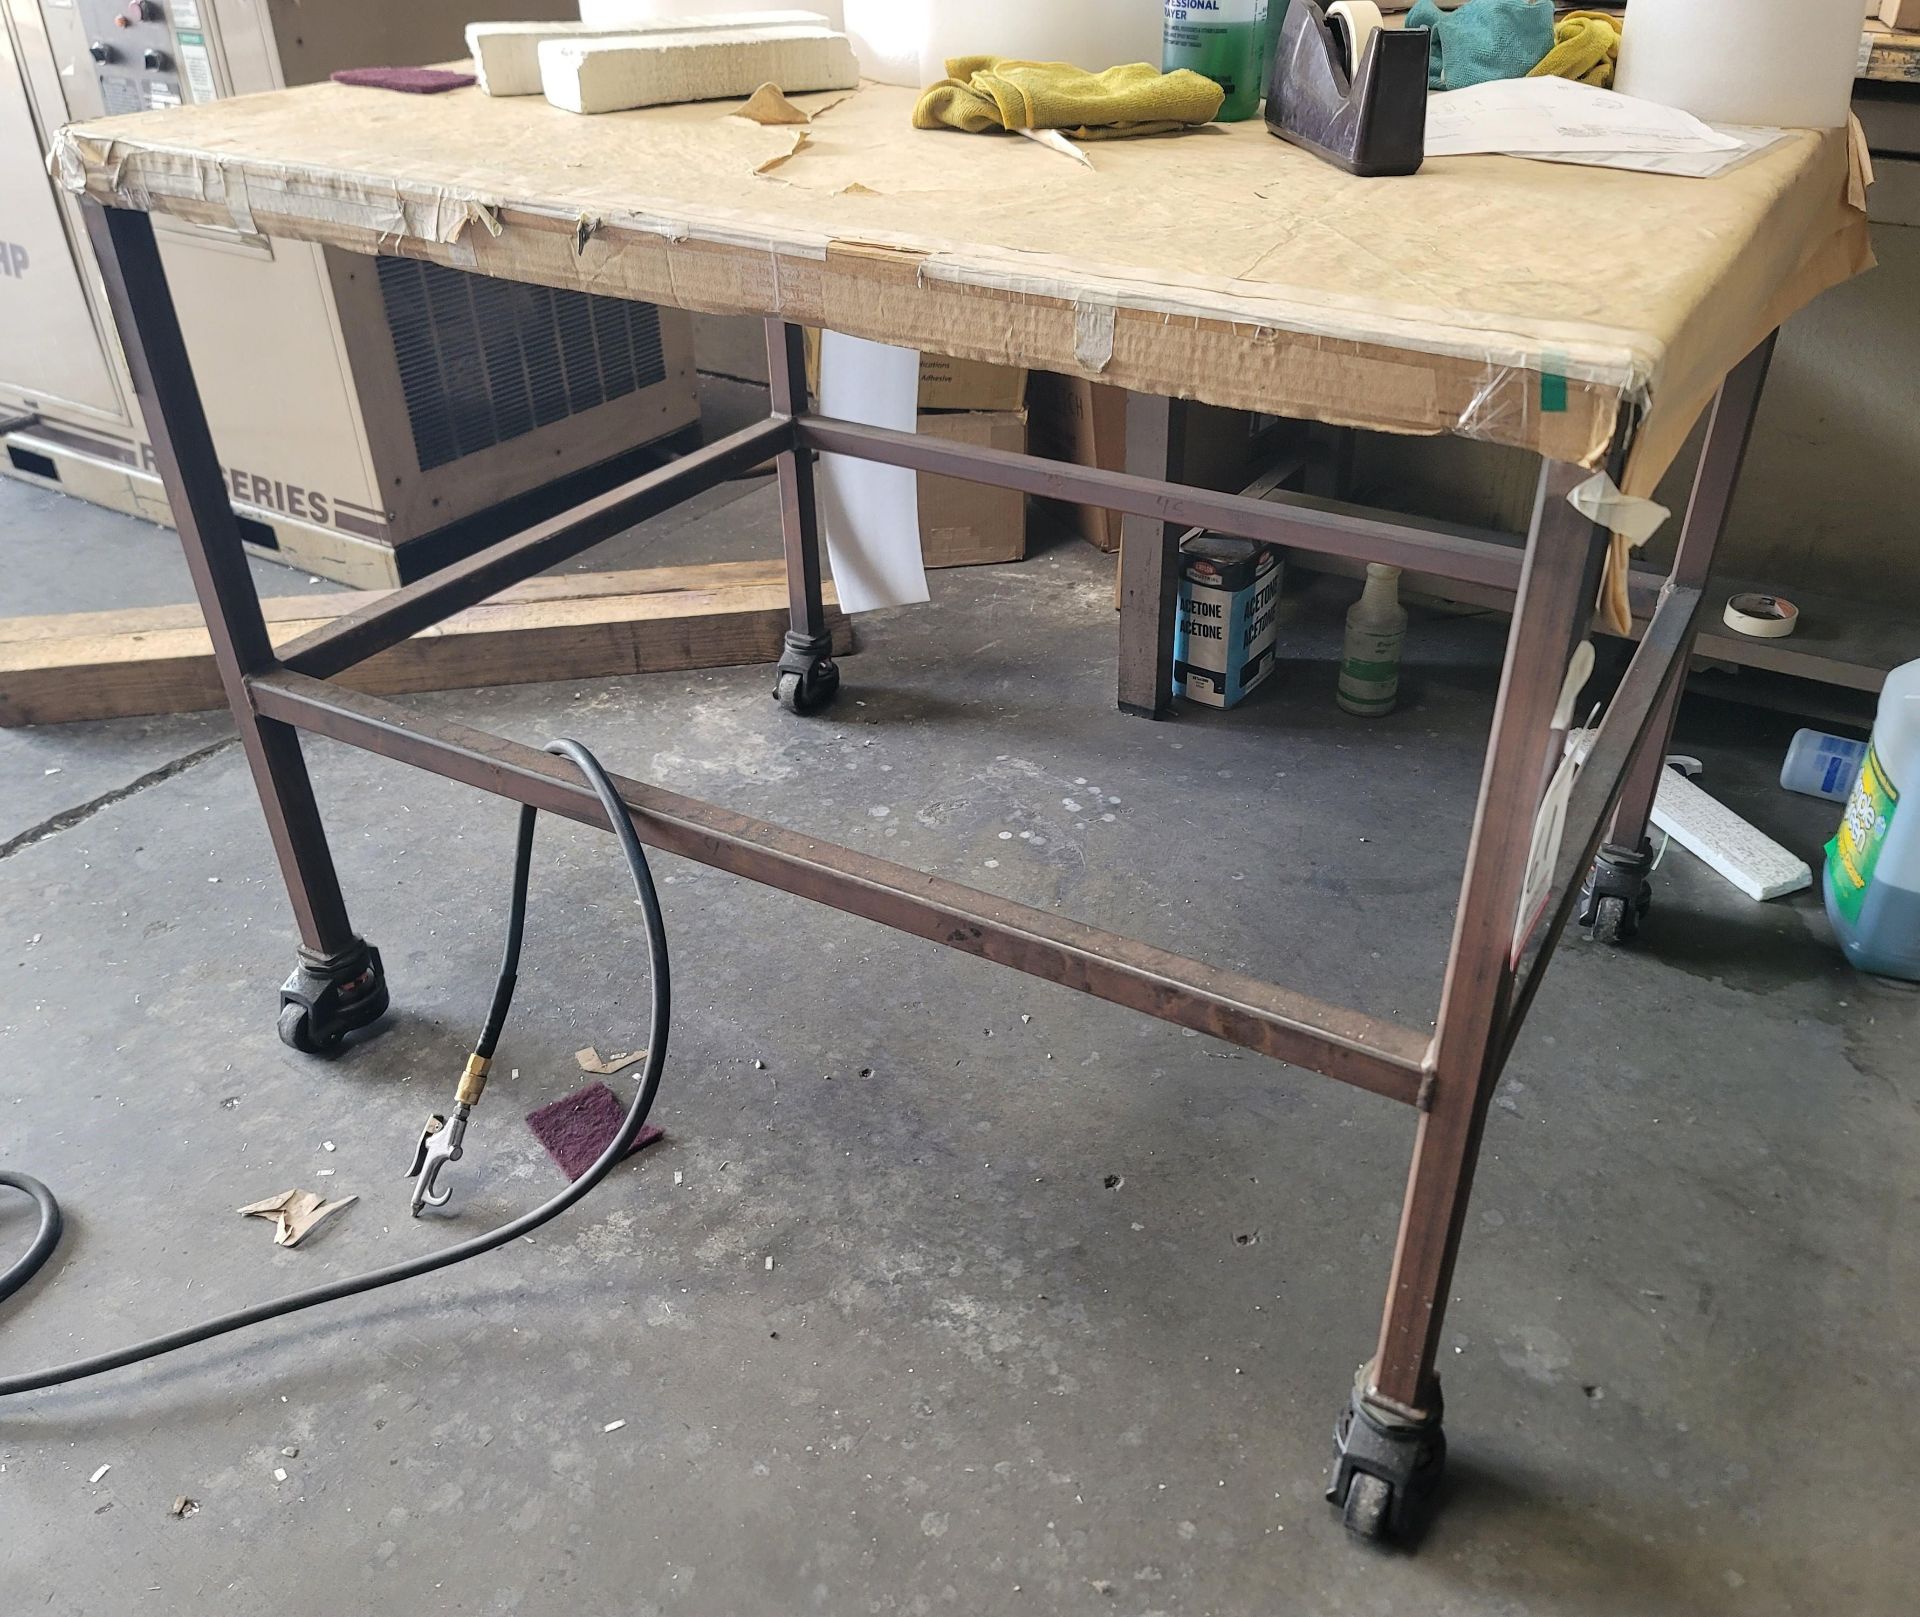 PORTABLE WORK TABLE/CART, 48" X 36" X 36" HT, CONTENTS NOT INCLUDED